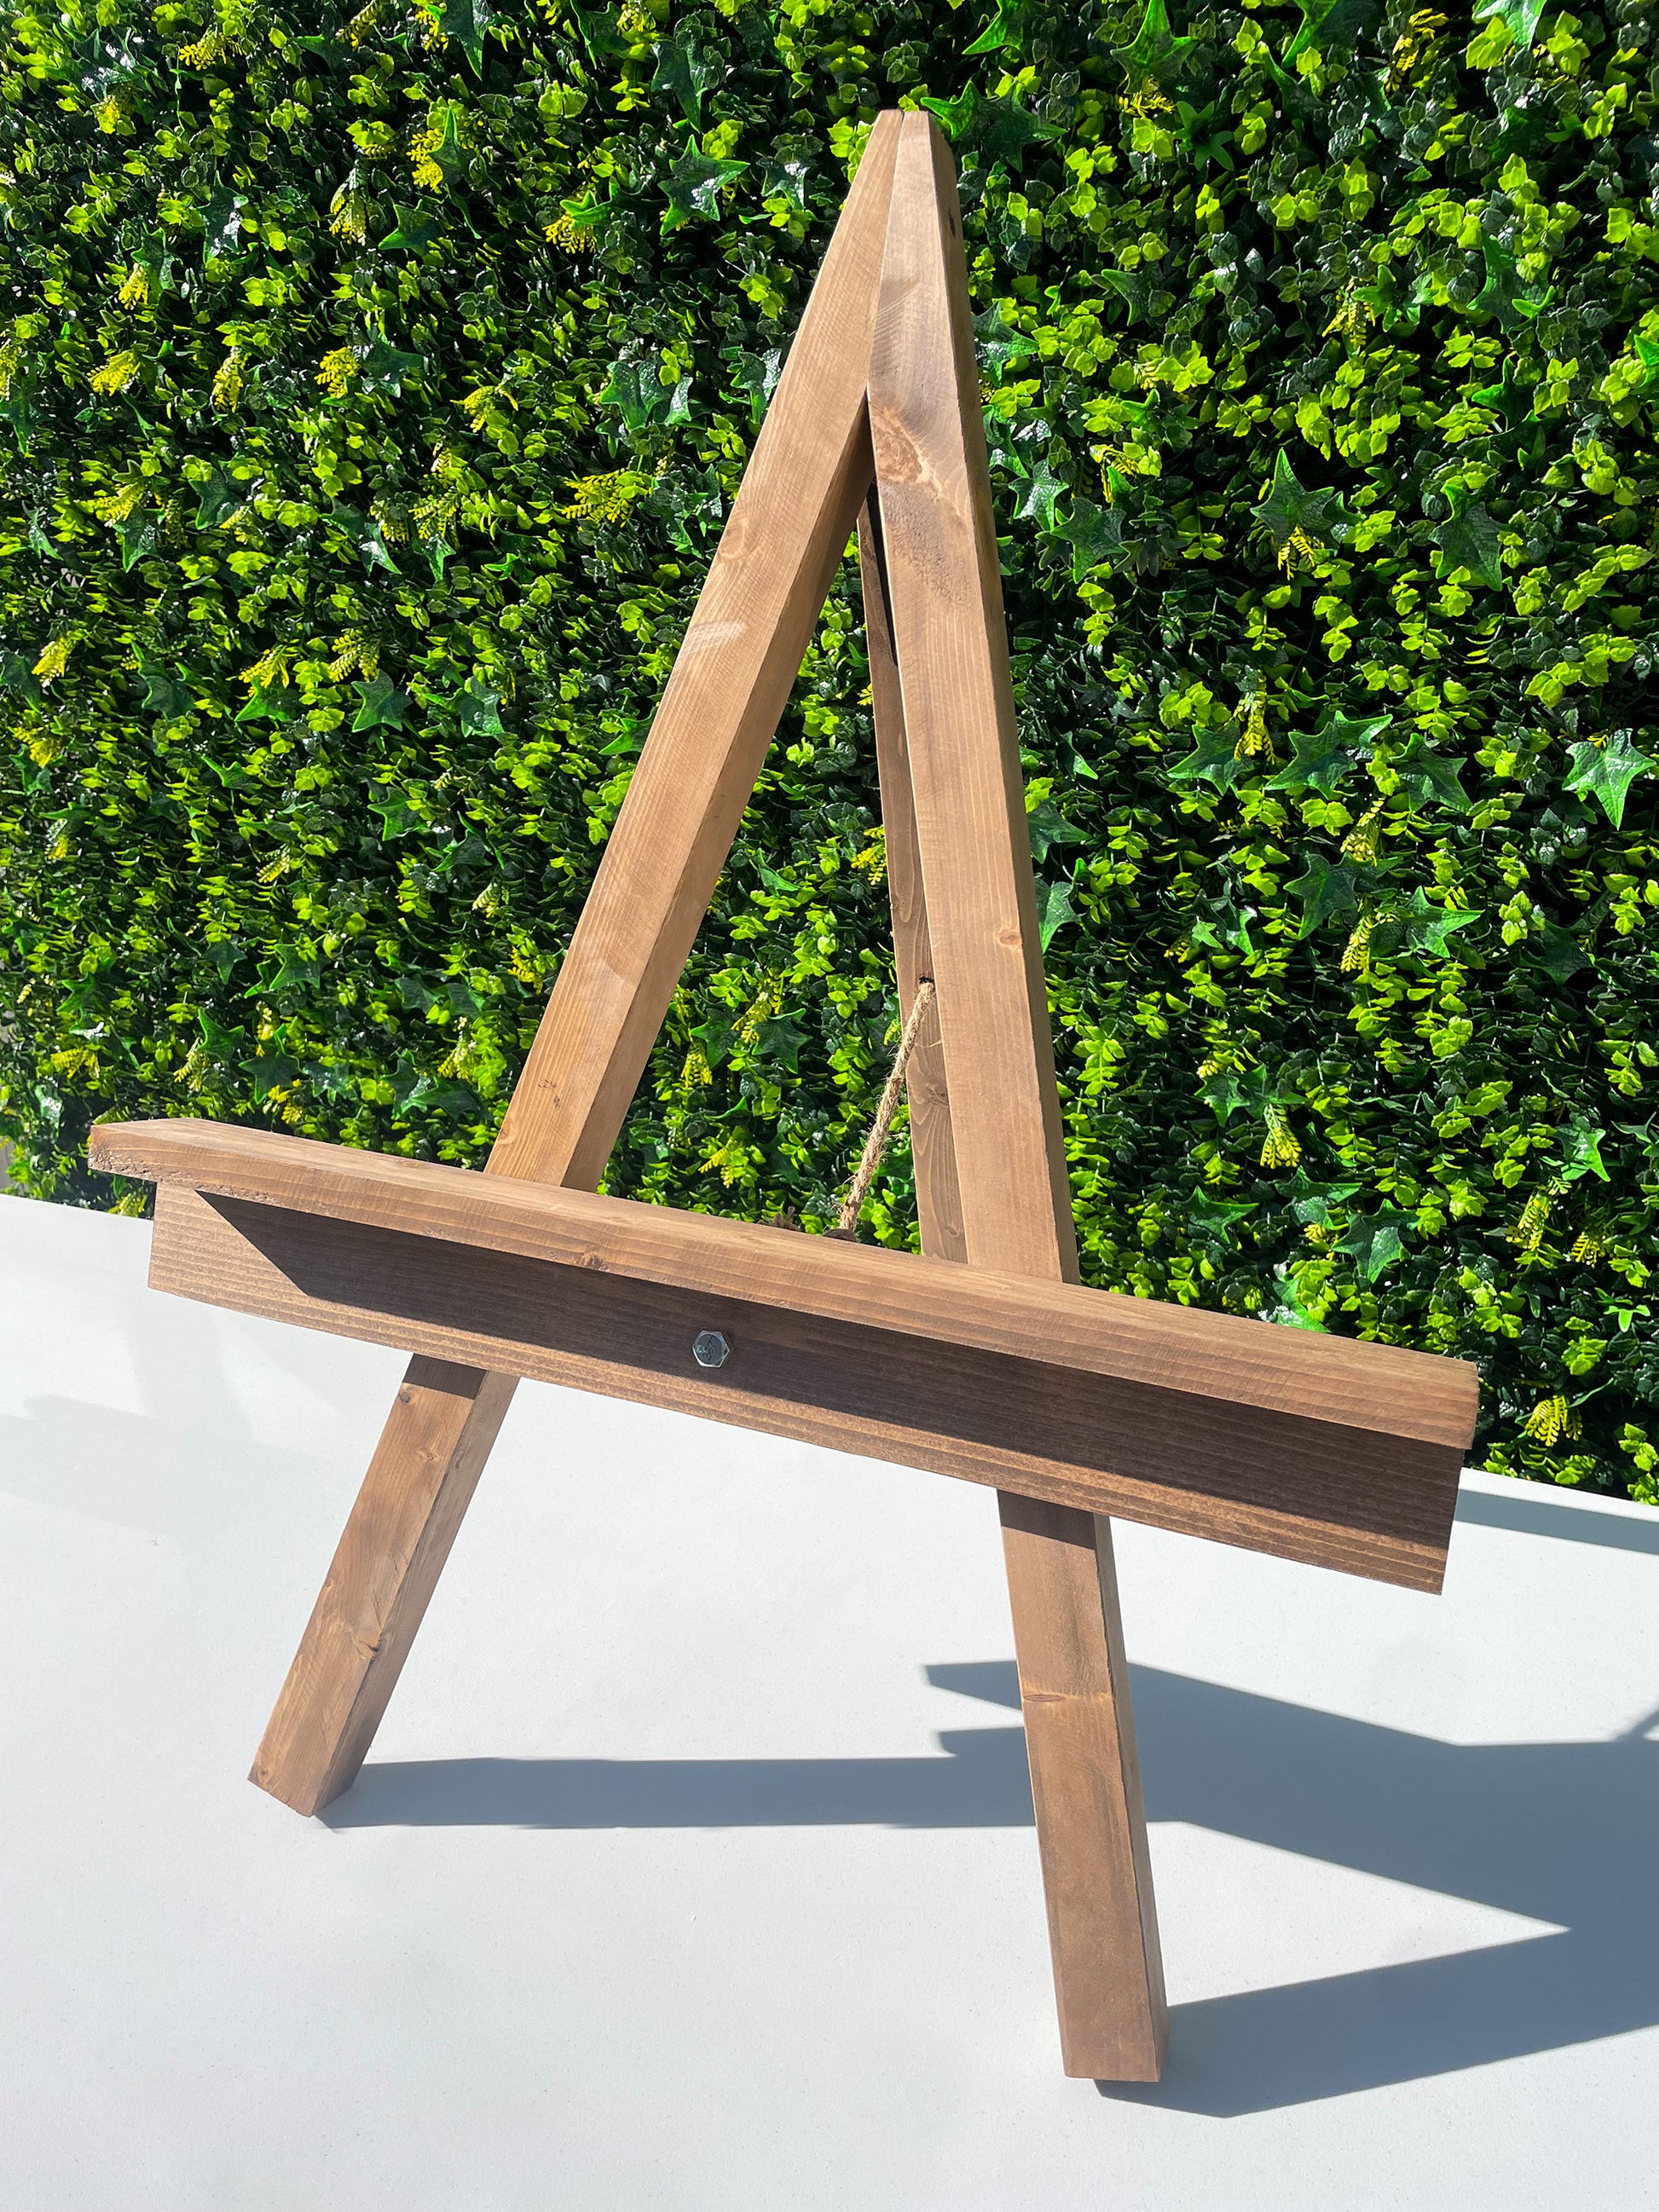 Mini Table Top Easel with Adjustable Shelf - Mini Wood Easel - Rustic Event Stand for Signage